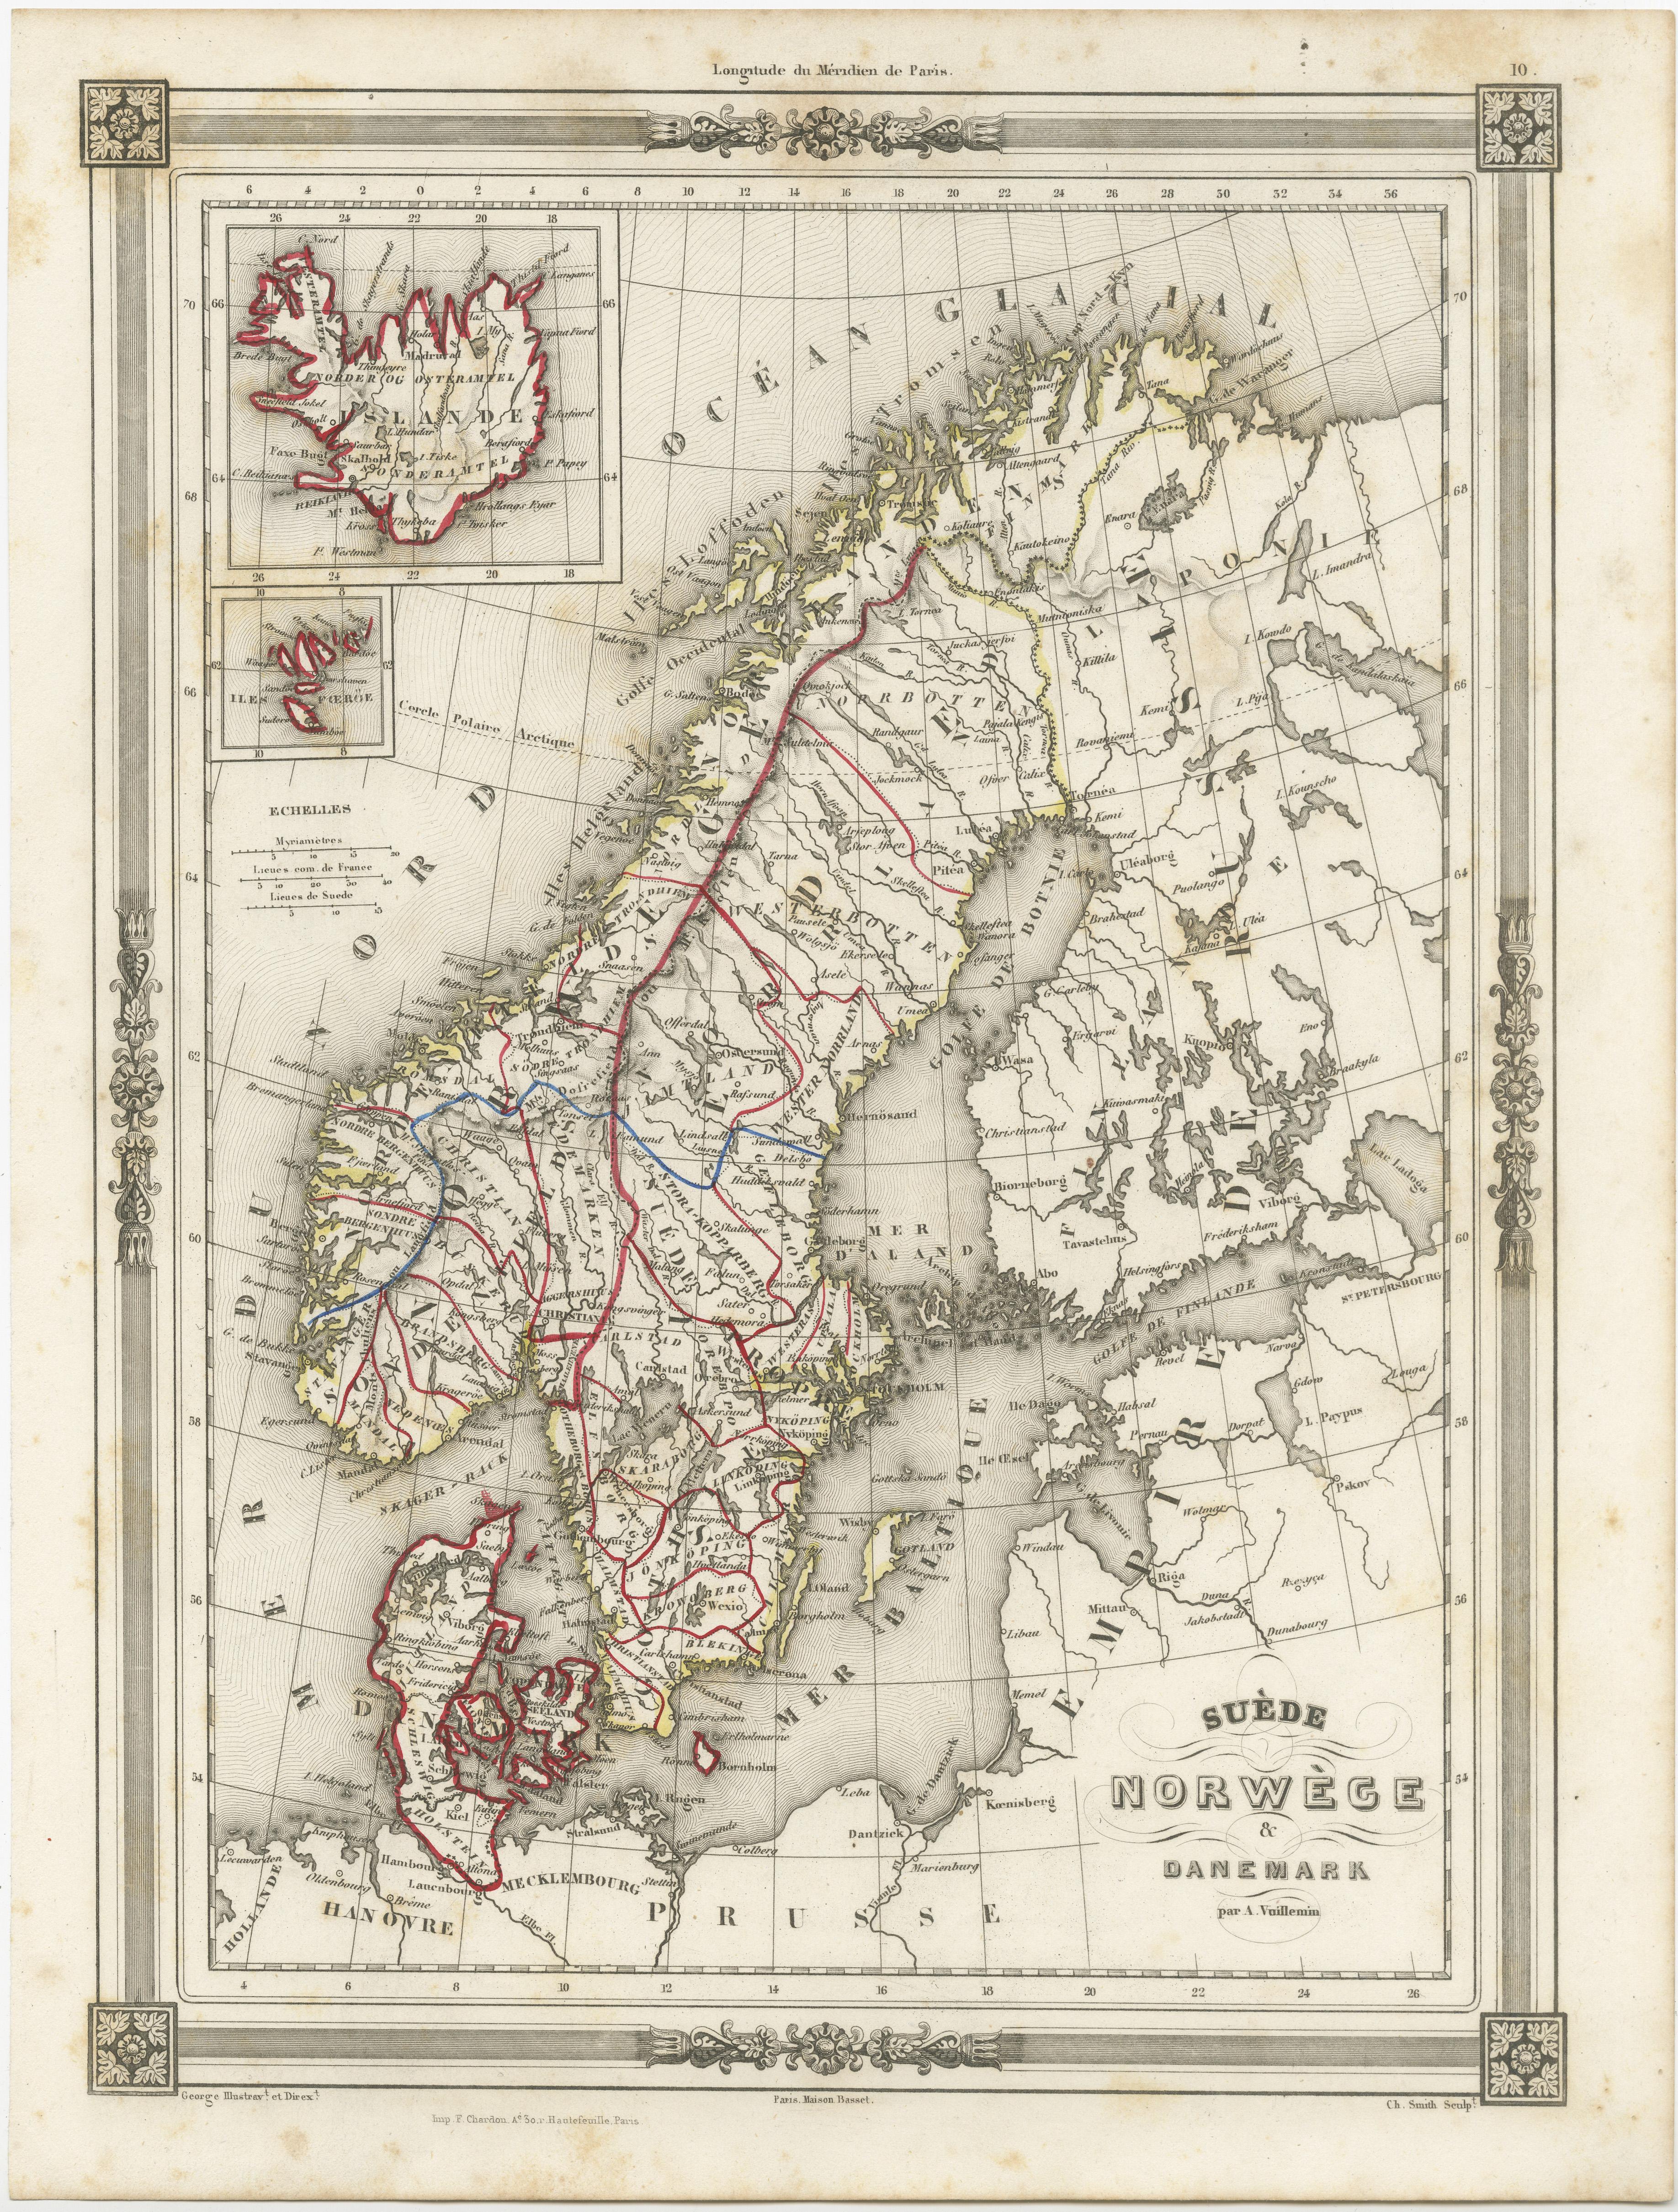 Antique map titled 'Suède, Norwège & Danemark'. Attractive map of Scandinavia, with Sweden, Norway and Denmark. With an inset map of Iceland and the Faroe Islands. This map originates from Maison Basset's 1852 edition of 'Atlas Illustre Destine a